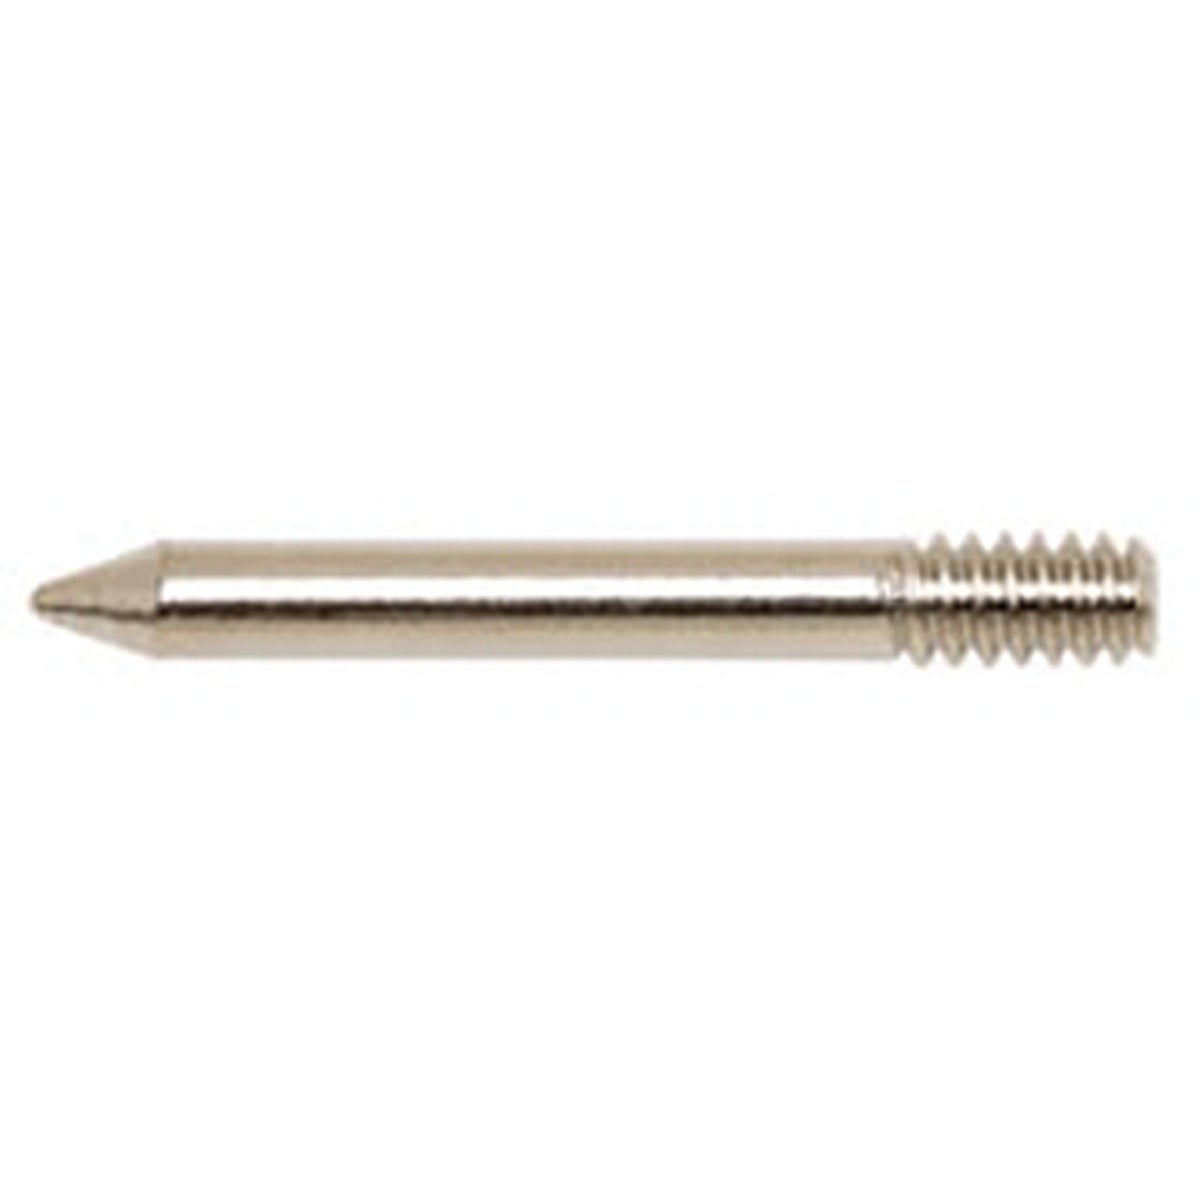 Item 314680, Conical point tip, use with model No. SP23LK soldering iron.